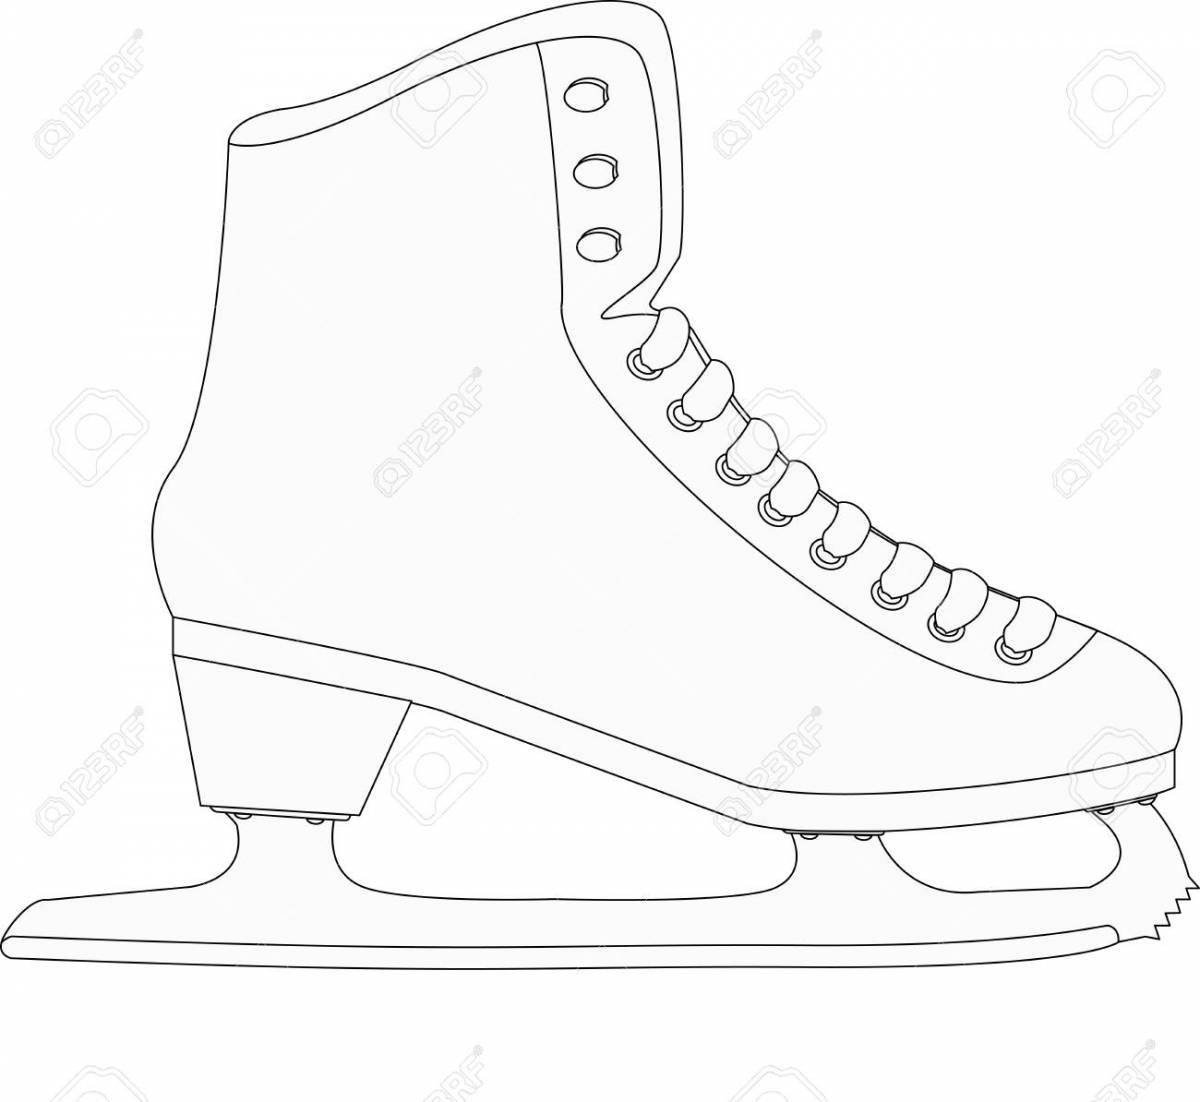 Colorful skates coloring book for children 5-6 years old